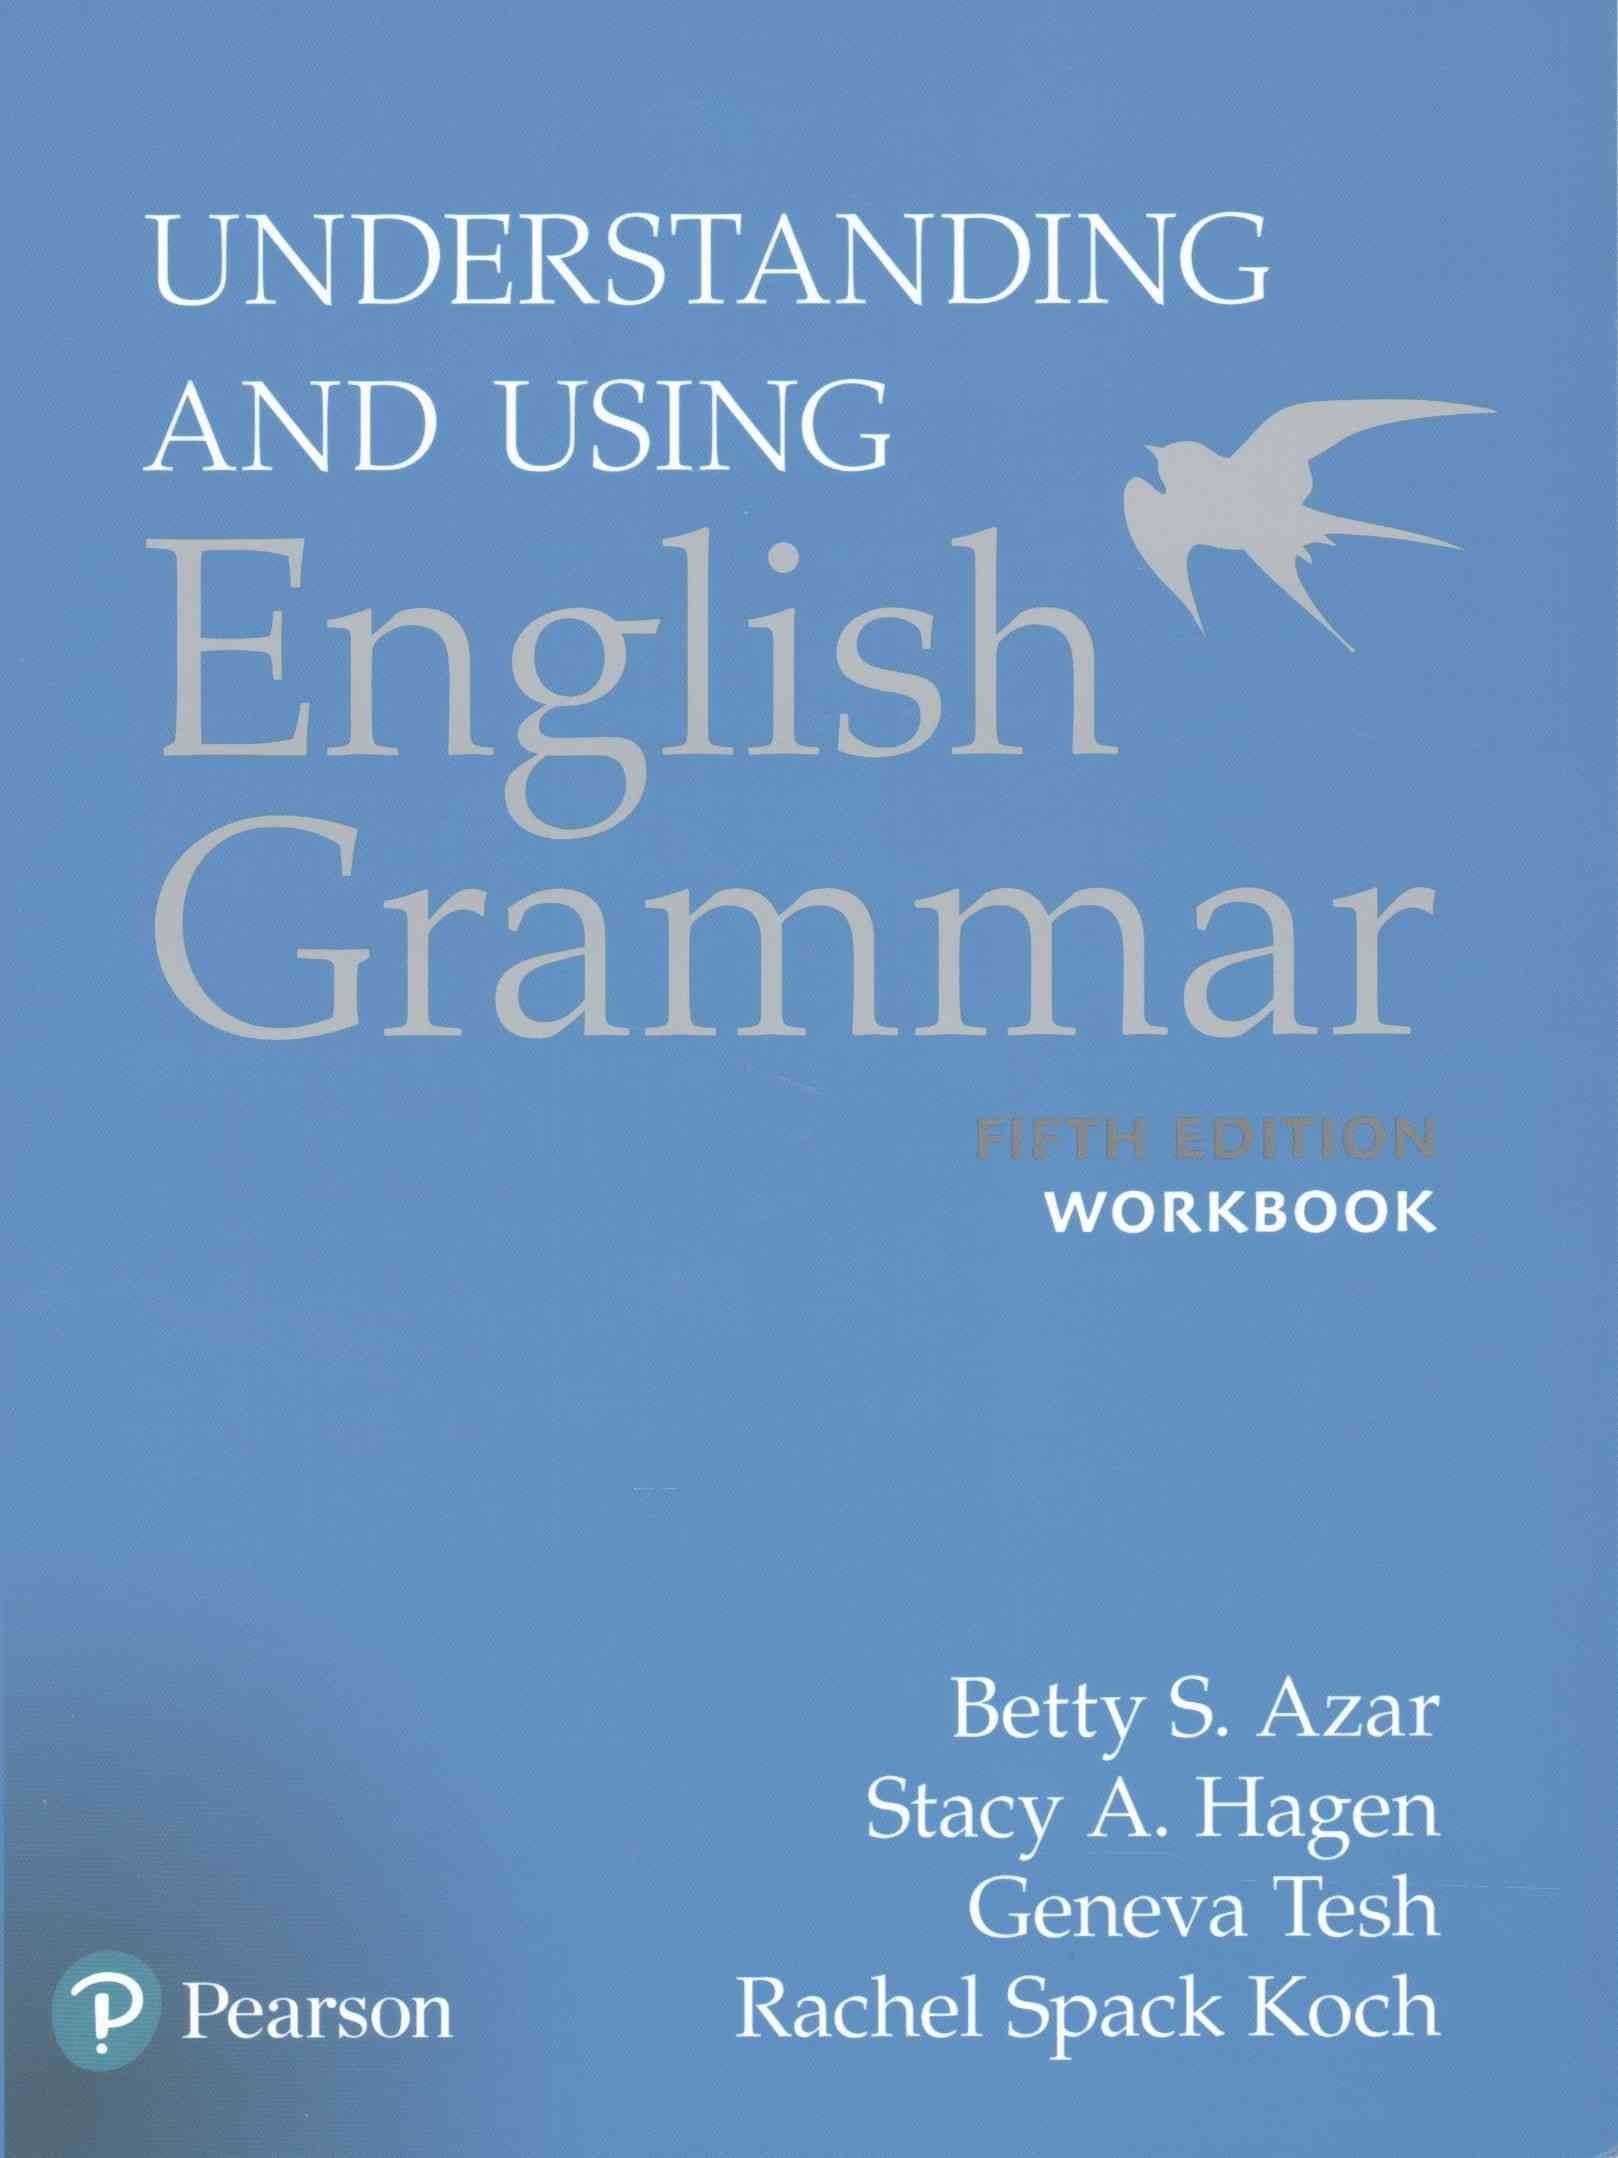 Buy　Workbook　Grammar,　S　Azar　Free　by　Understanding　With　Using　and　Betty　English　Delivery